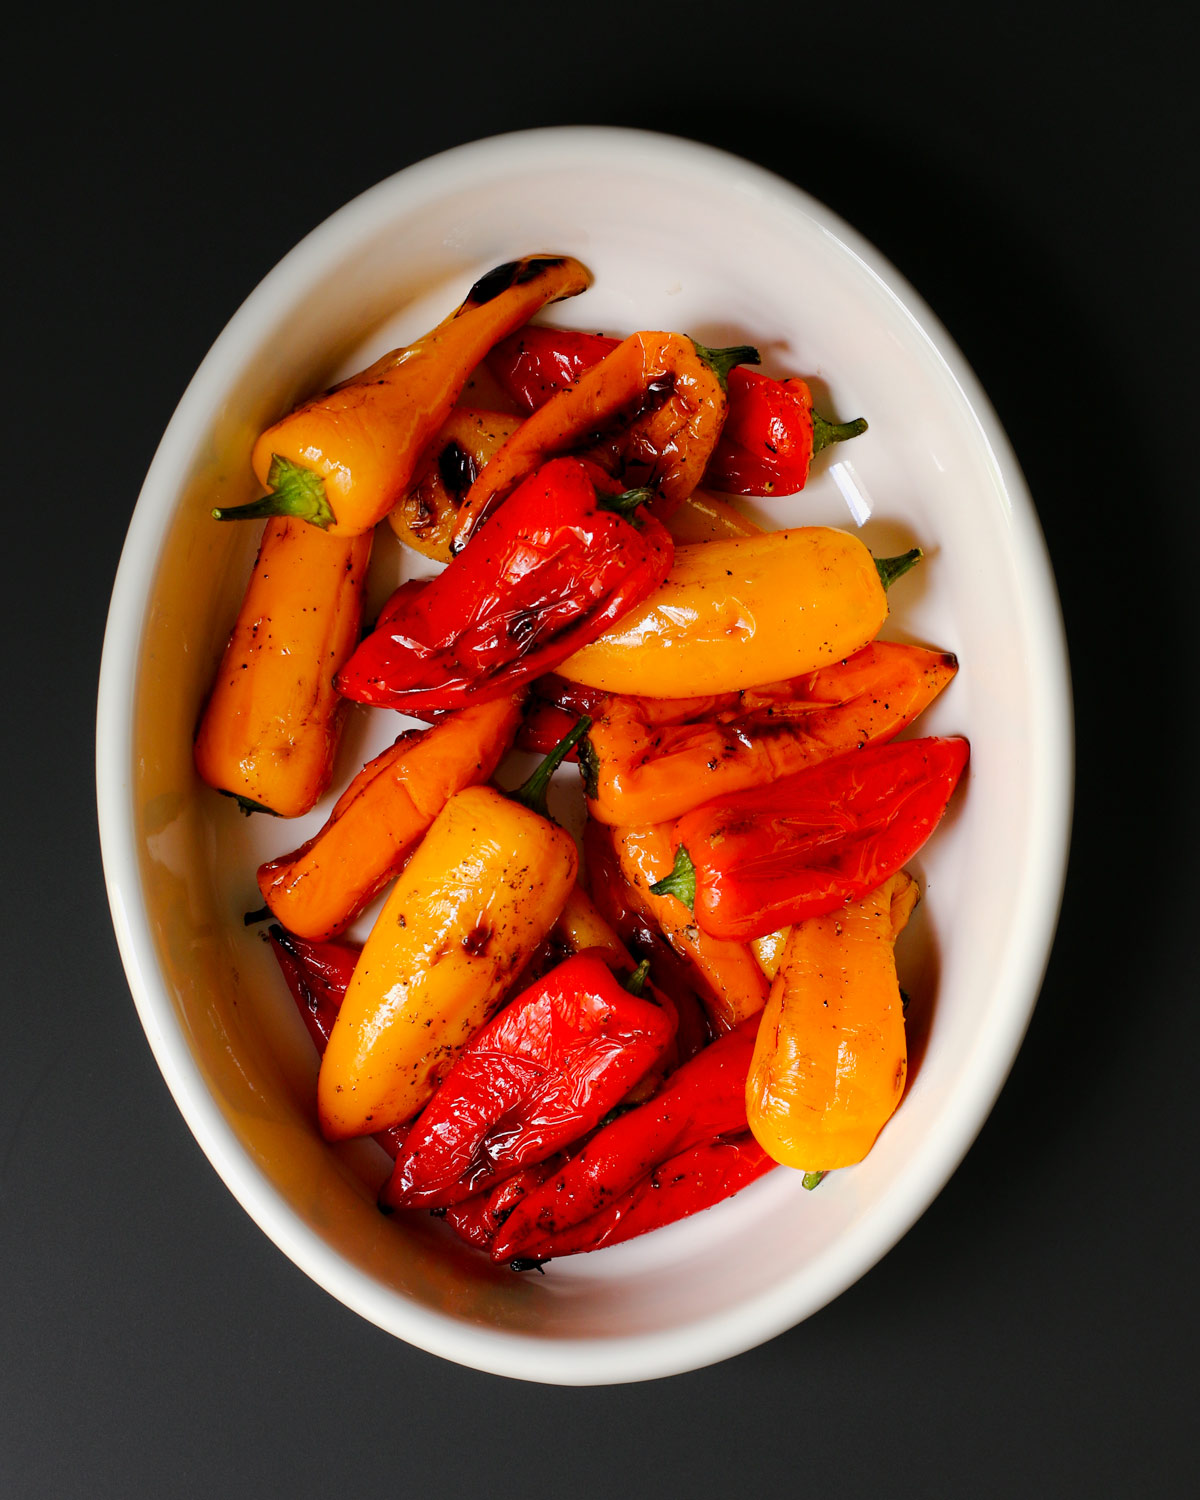 grilled tri-color peppers in oval serving dish on black table.